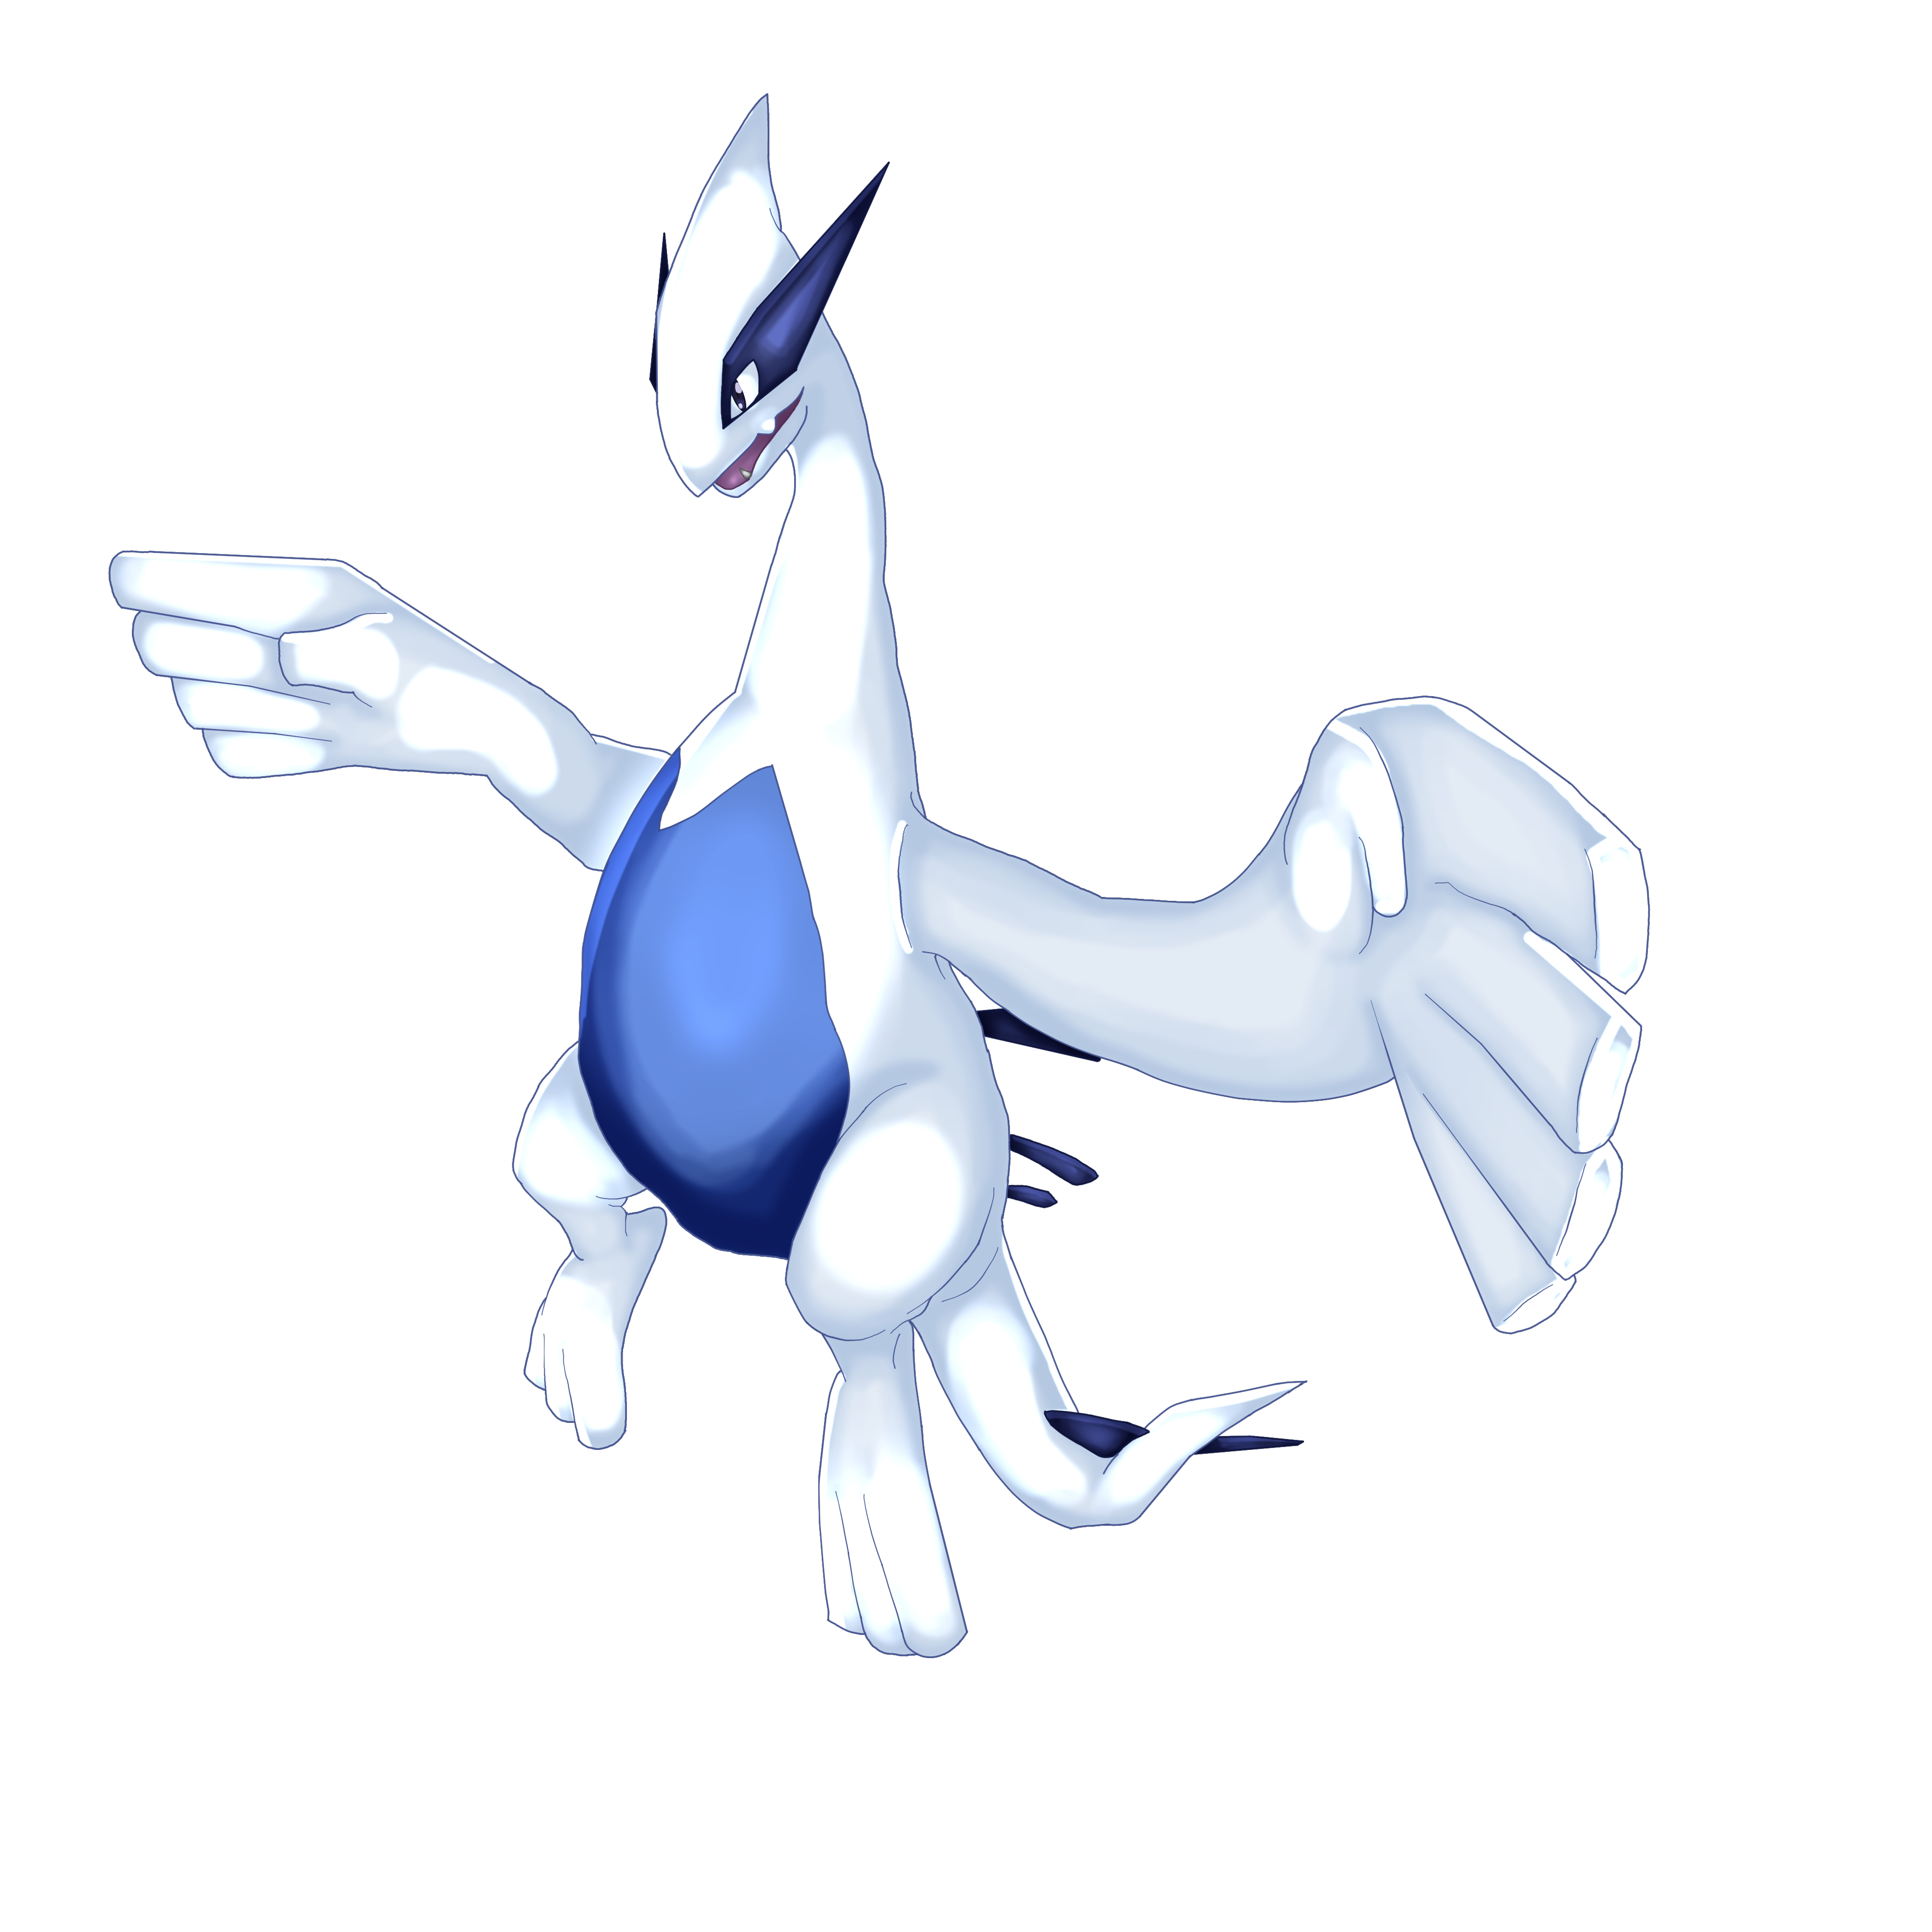 Lugia's Territory by Articuno on deviantART